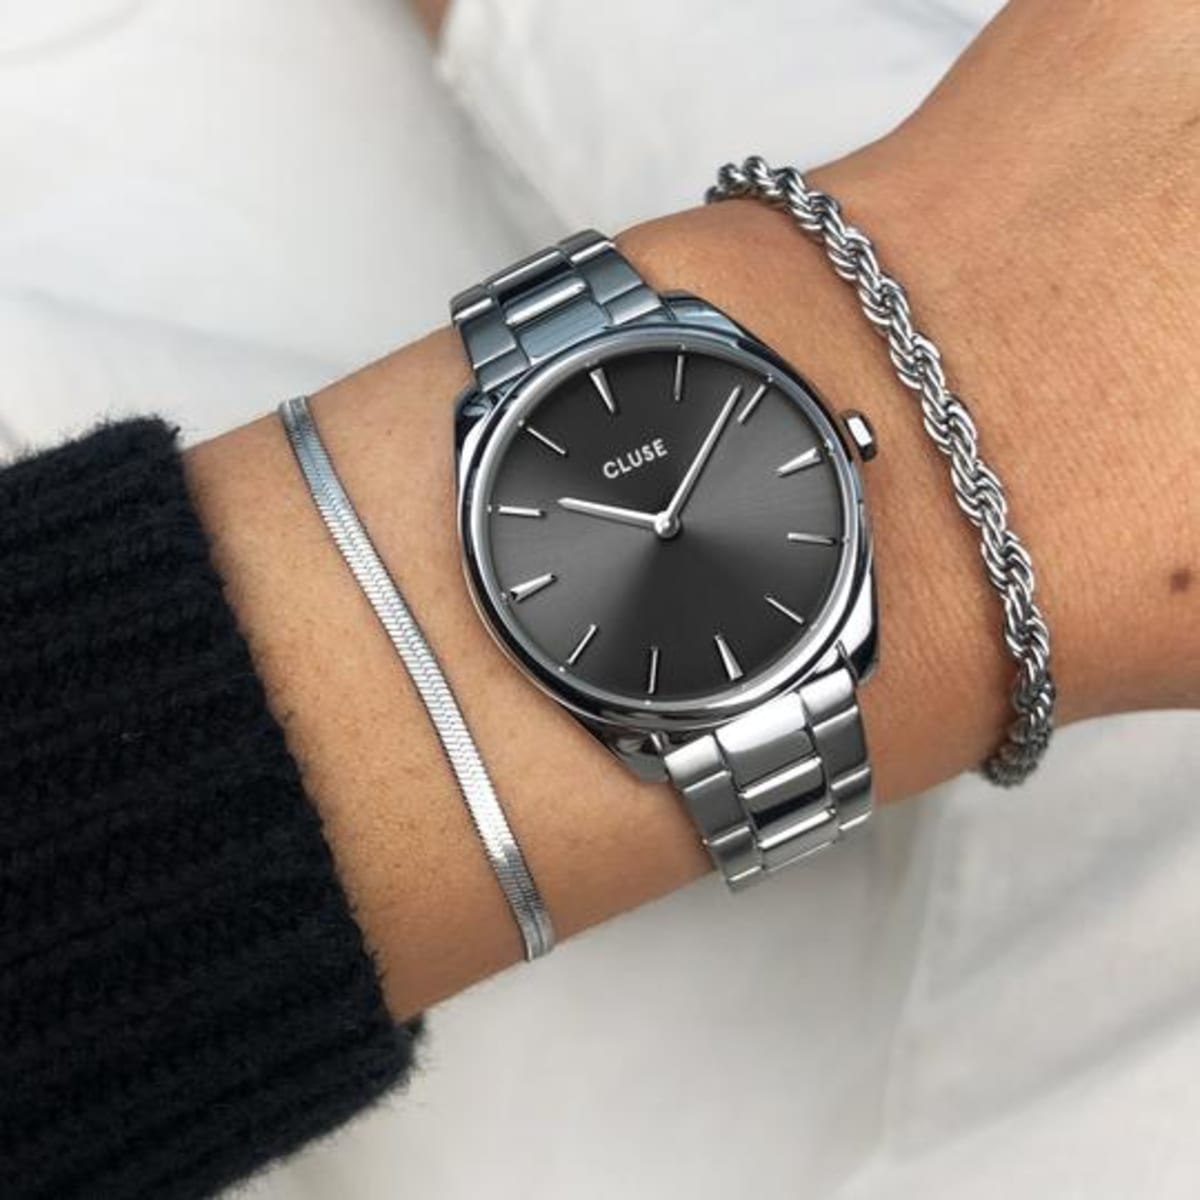 This contemporary charmer is an elegant style companion in daily life and on special occasions. The Féroce Petite is scaled down in size, but not in detail. Its 31.5 mm case is delicate and refined. The dark grey dial is surrounded by a silver coloured case and steel strap to give it a chic and timeless finish. You can easily interchange the strap of this Féroce Petite watch with any 16 mm CLUSE watch strap.